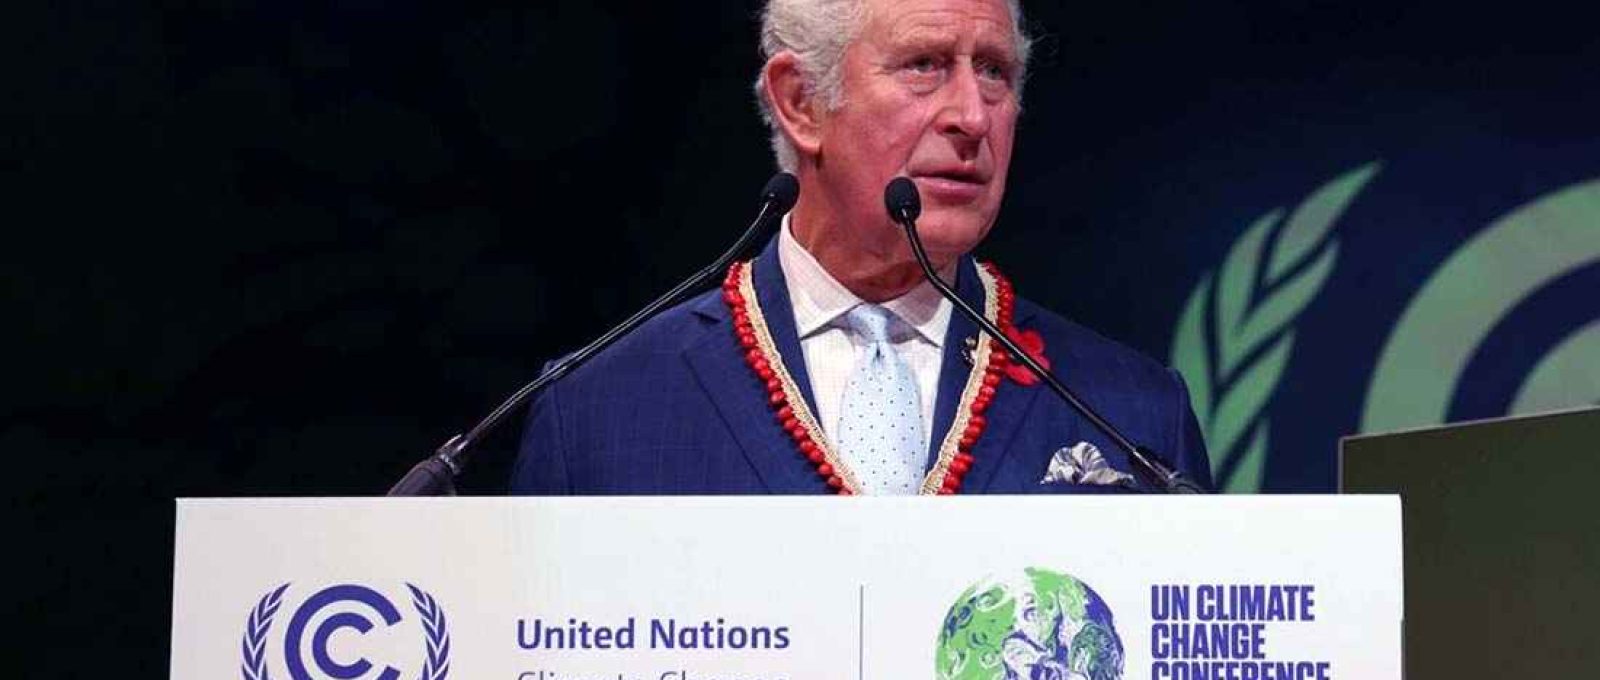 Príncipe Charles discursa na COP26 (@ClarenceHouse/Twitter).